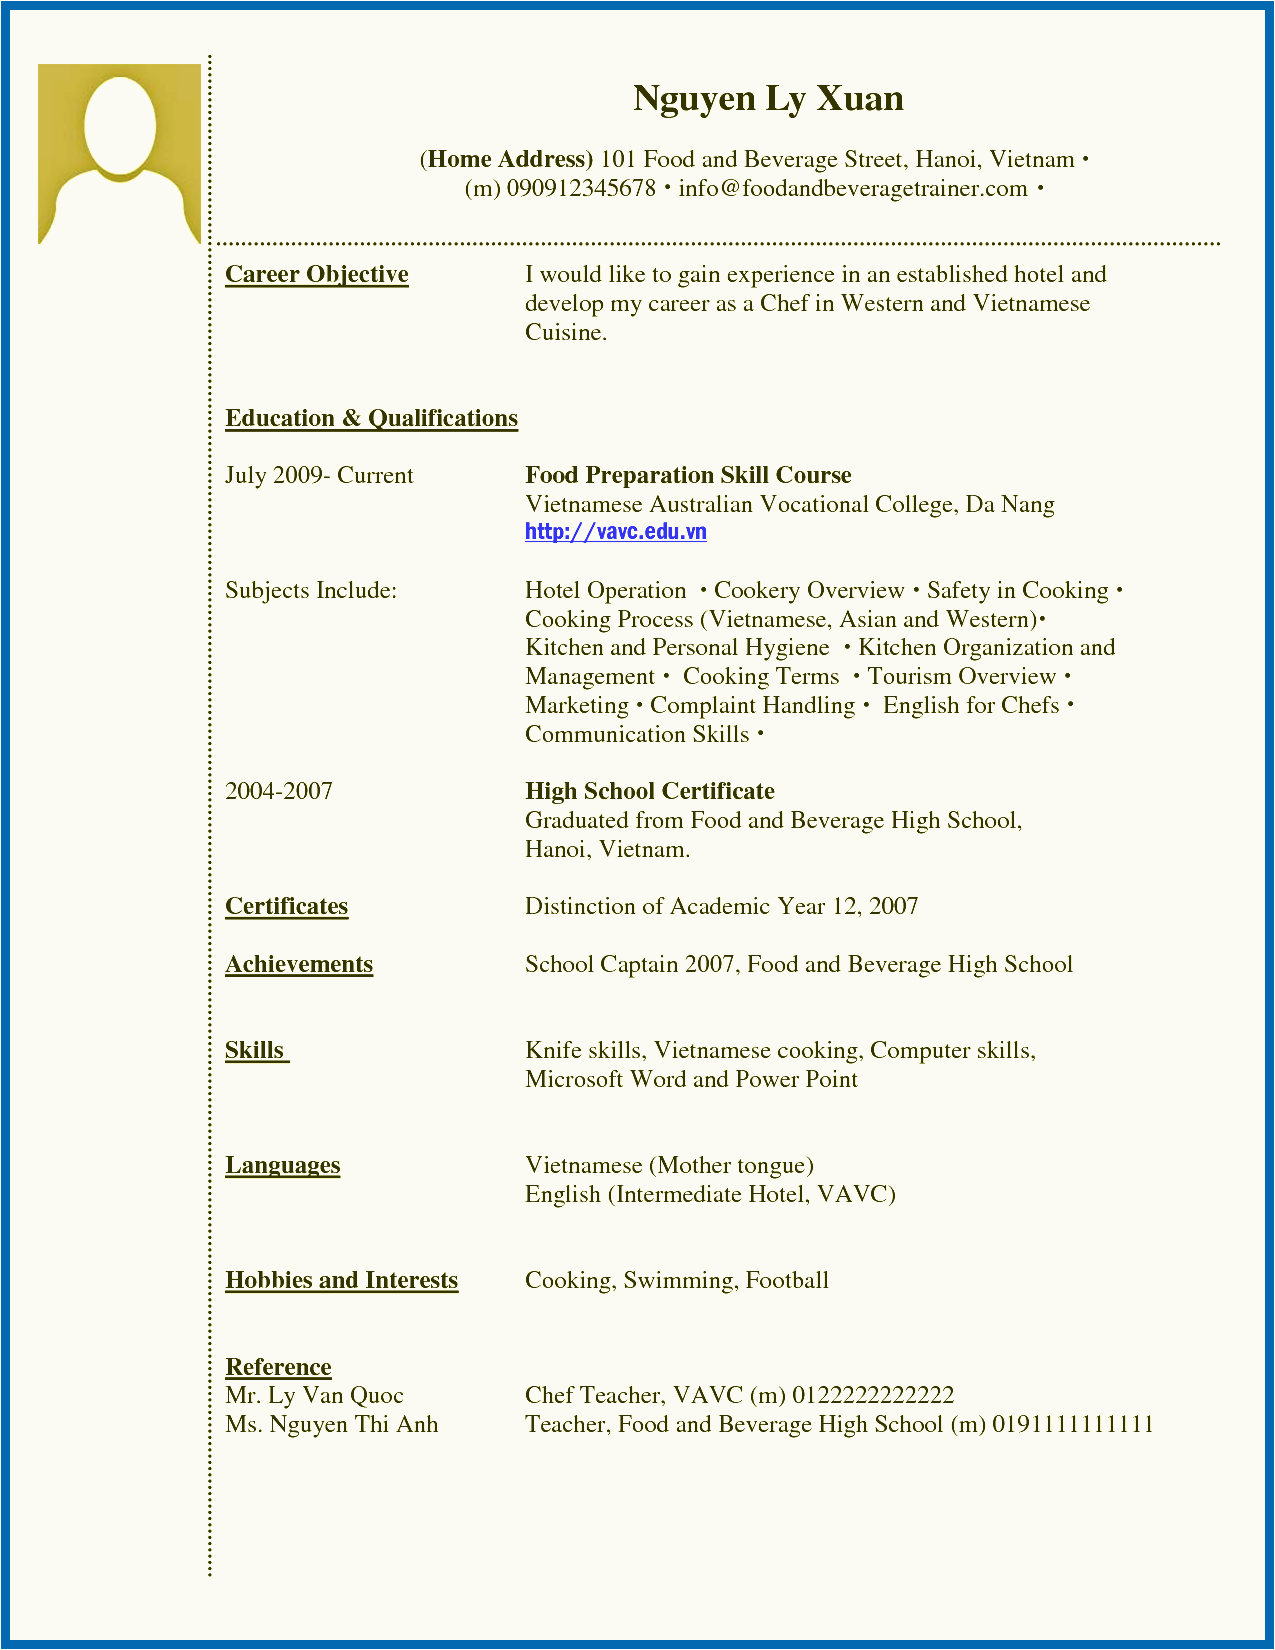 Resume Sample for Students with No Experience 12 13 Cv Samples for Students with No Experience